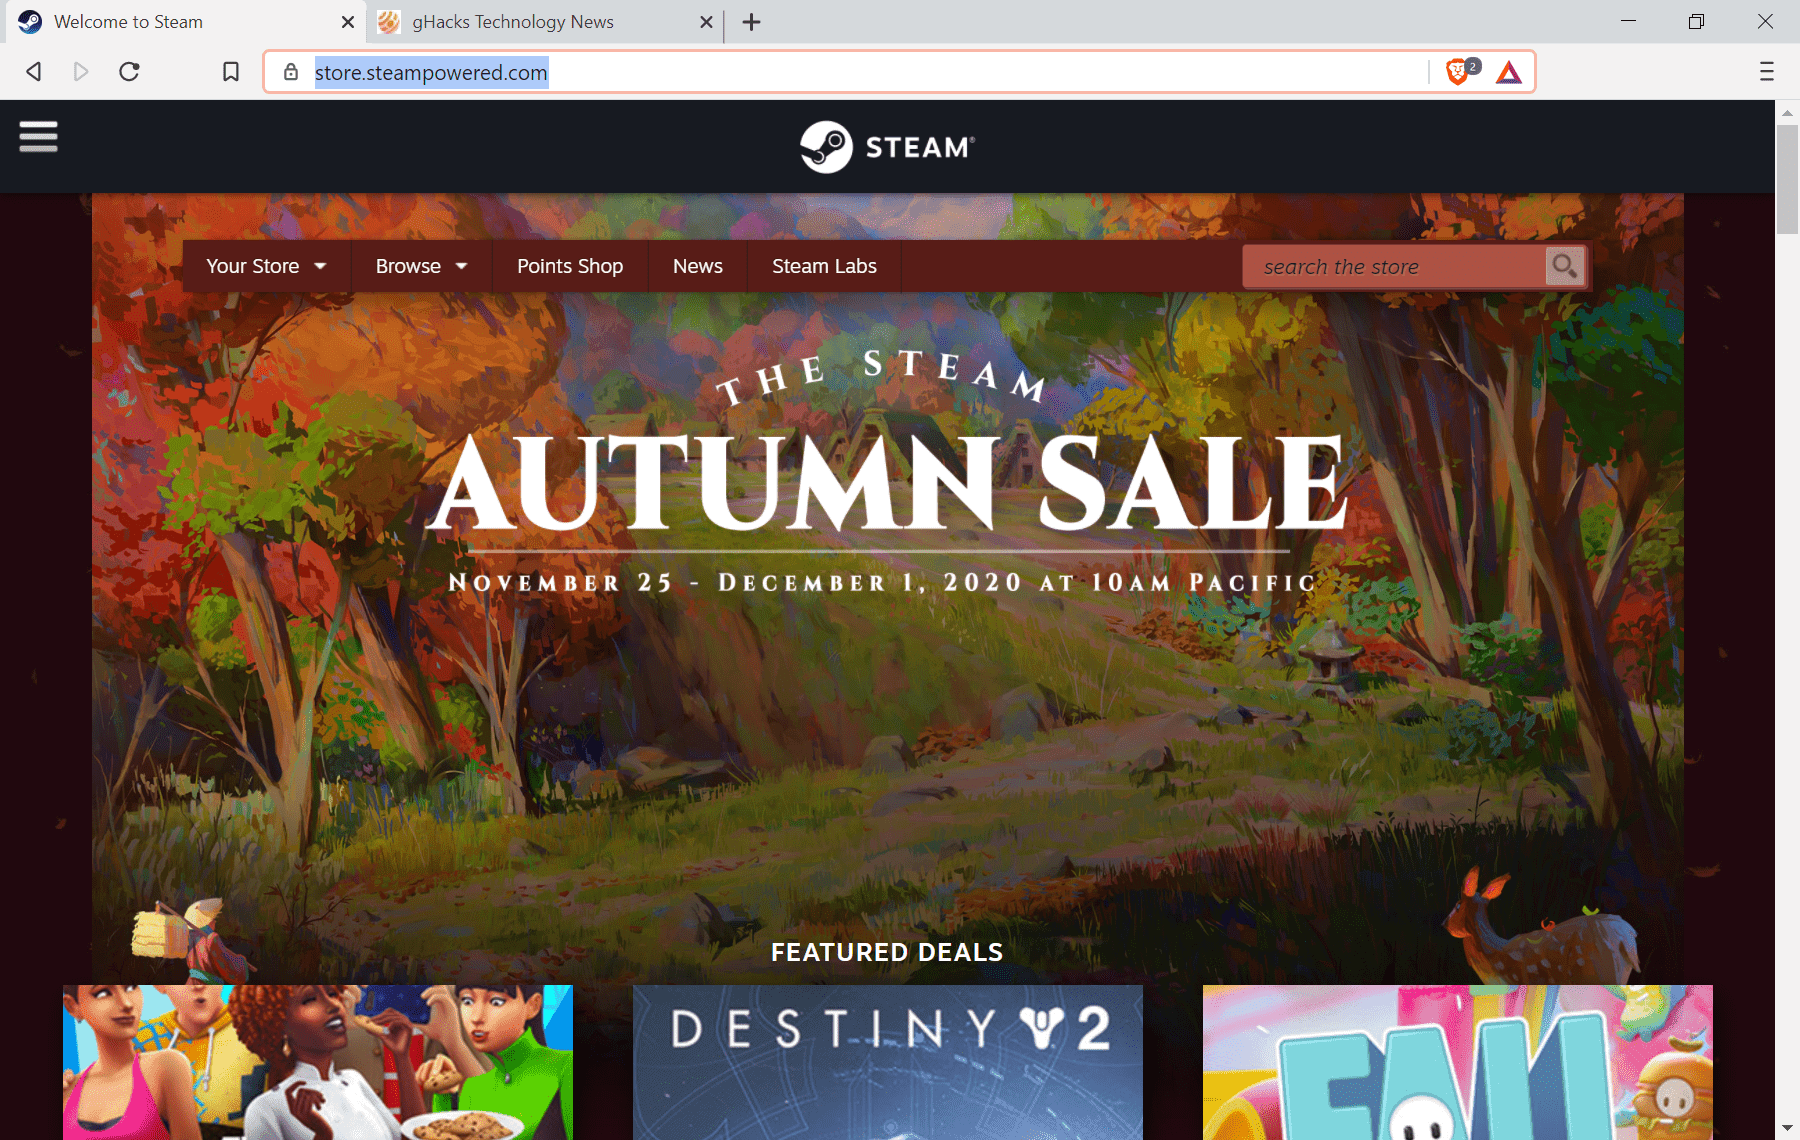 Steam Autumn Sale 2020: here are 8 game suggestions